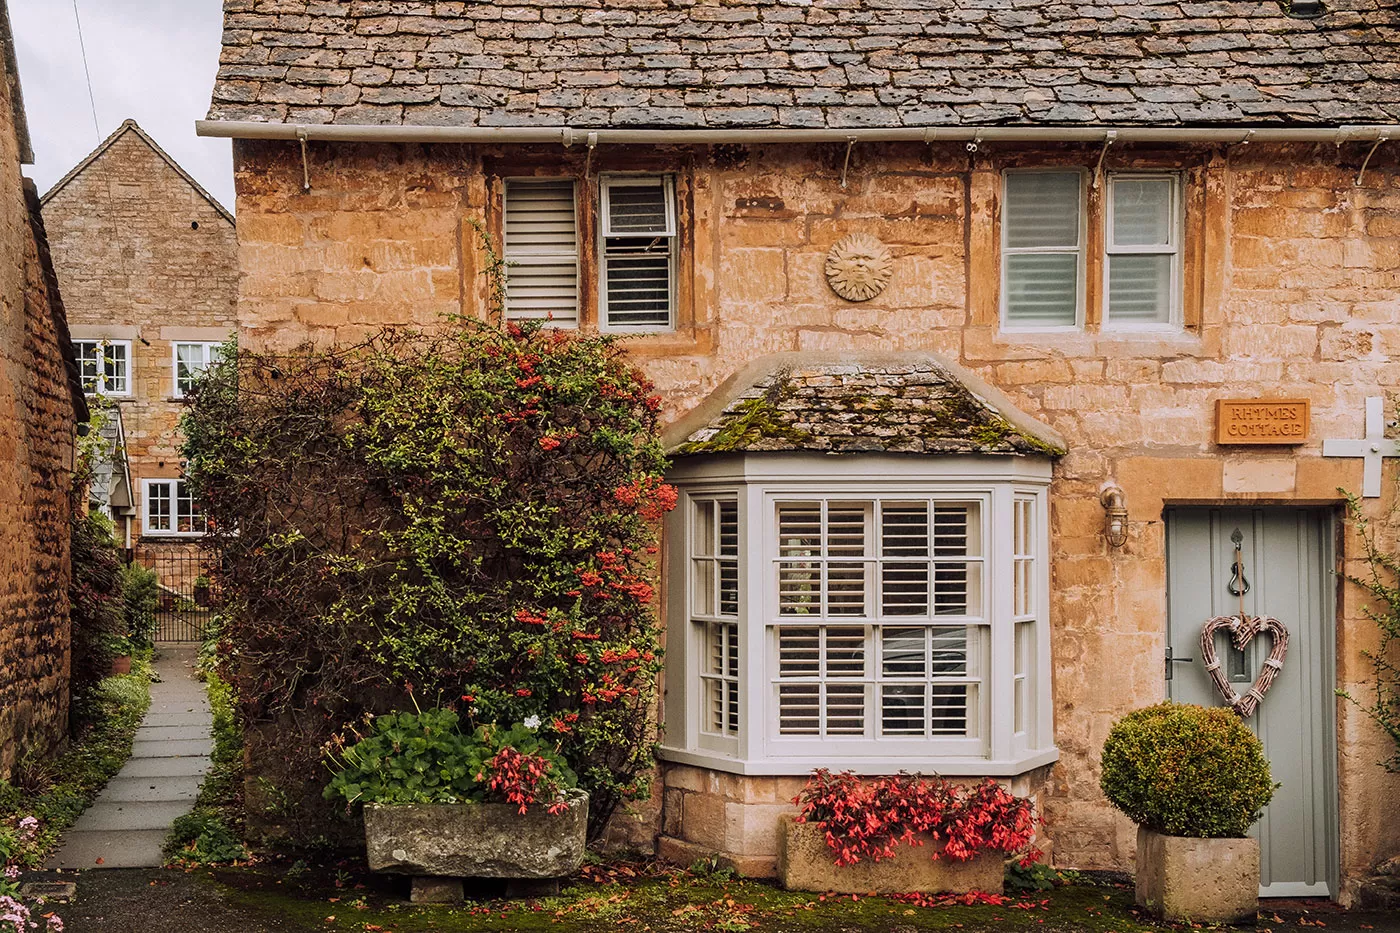 Cotswolds Best Villages - Moreton-in-Marsh - Pretty cottage home covered in flowers